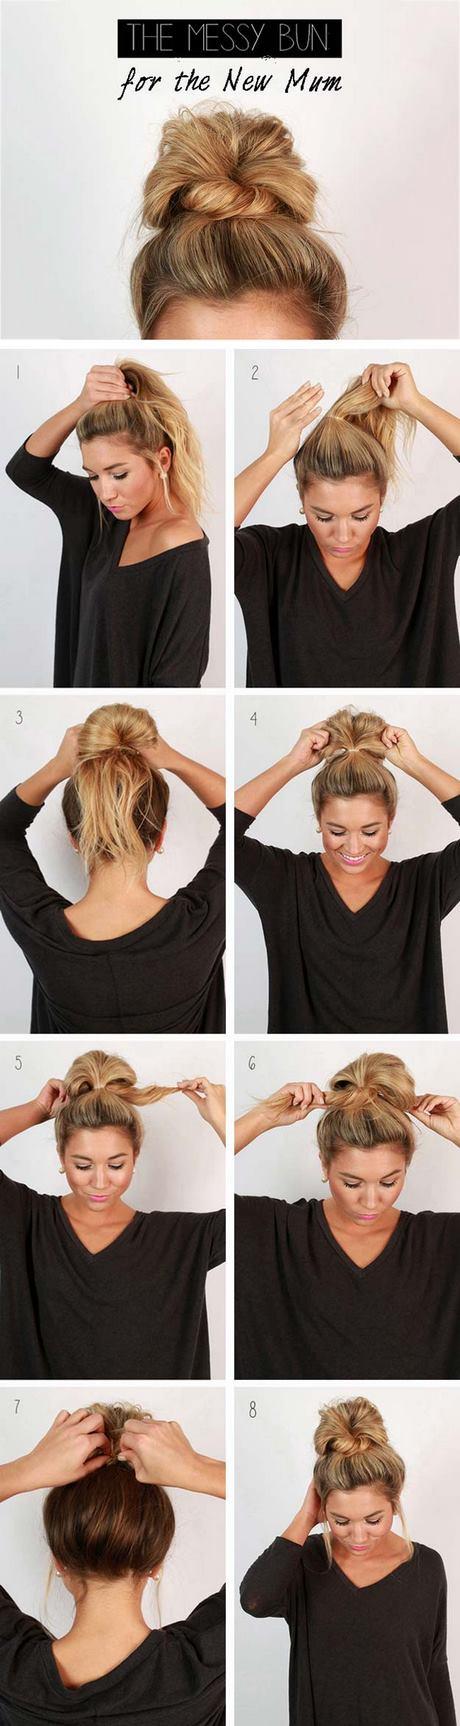 Quick and easy hairstyles for girls with medium hair quick-and-easy-hairstyles-for-girls-with-medium-hair-24_6